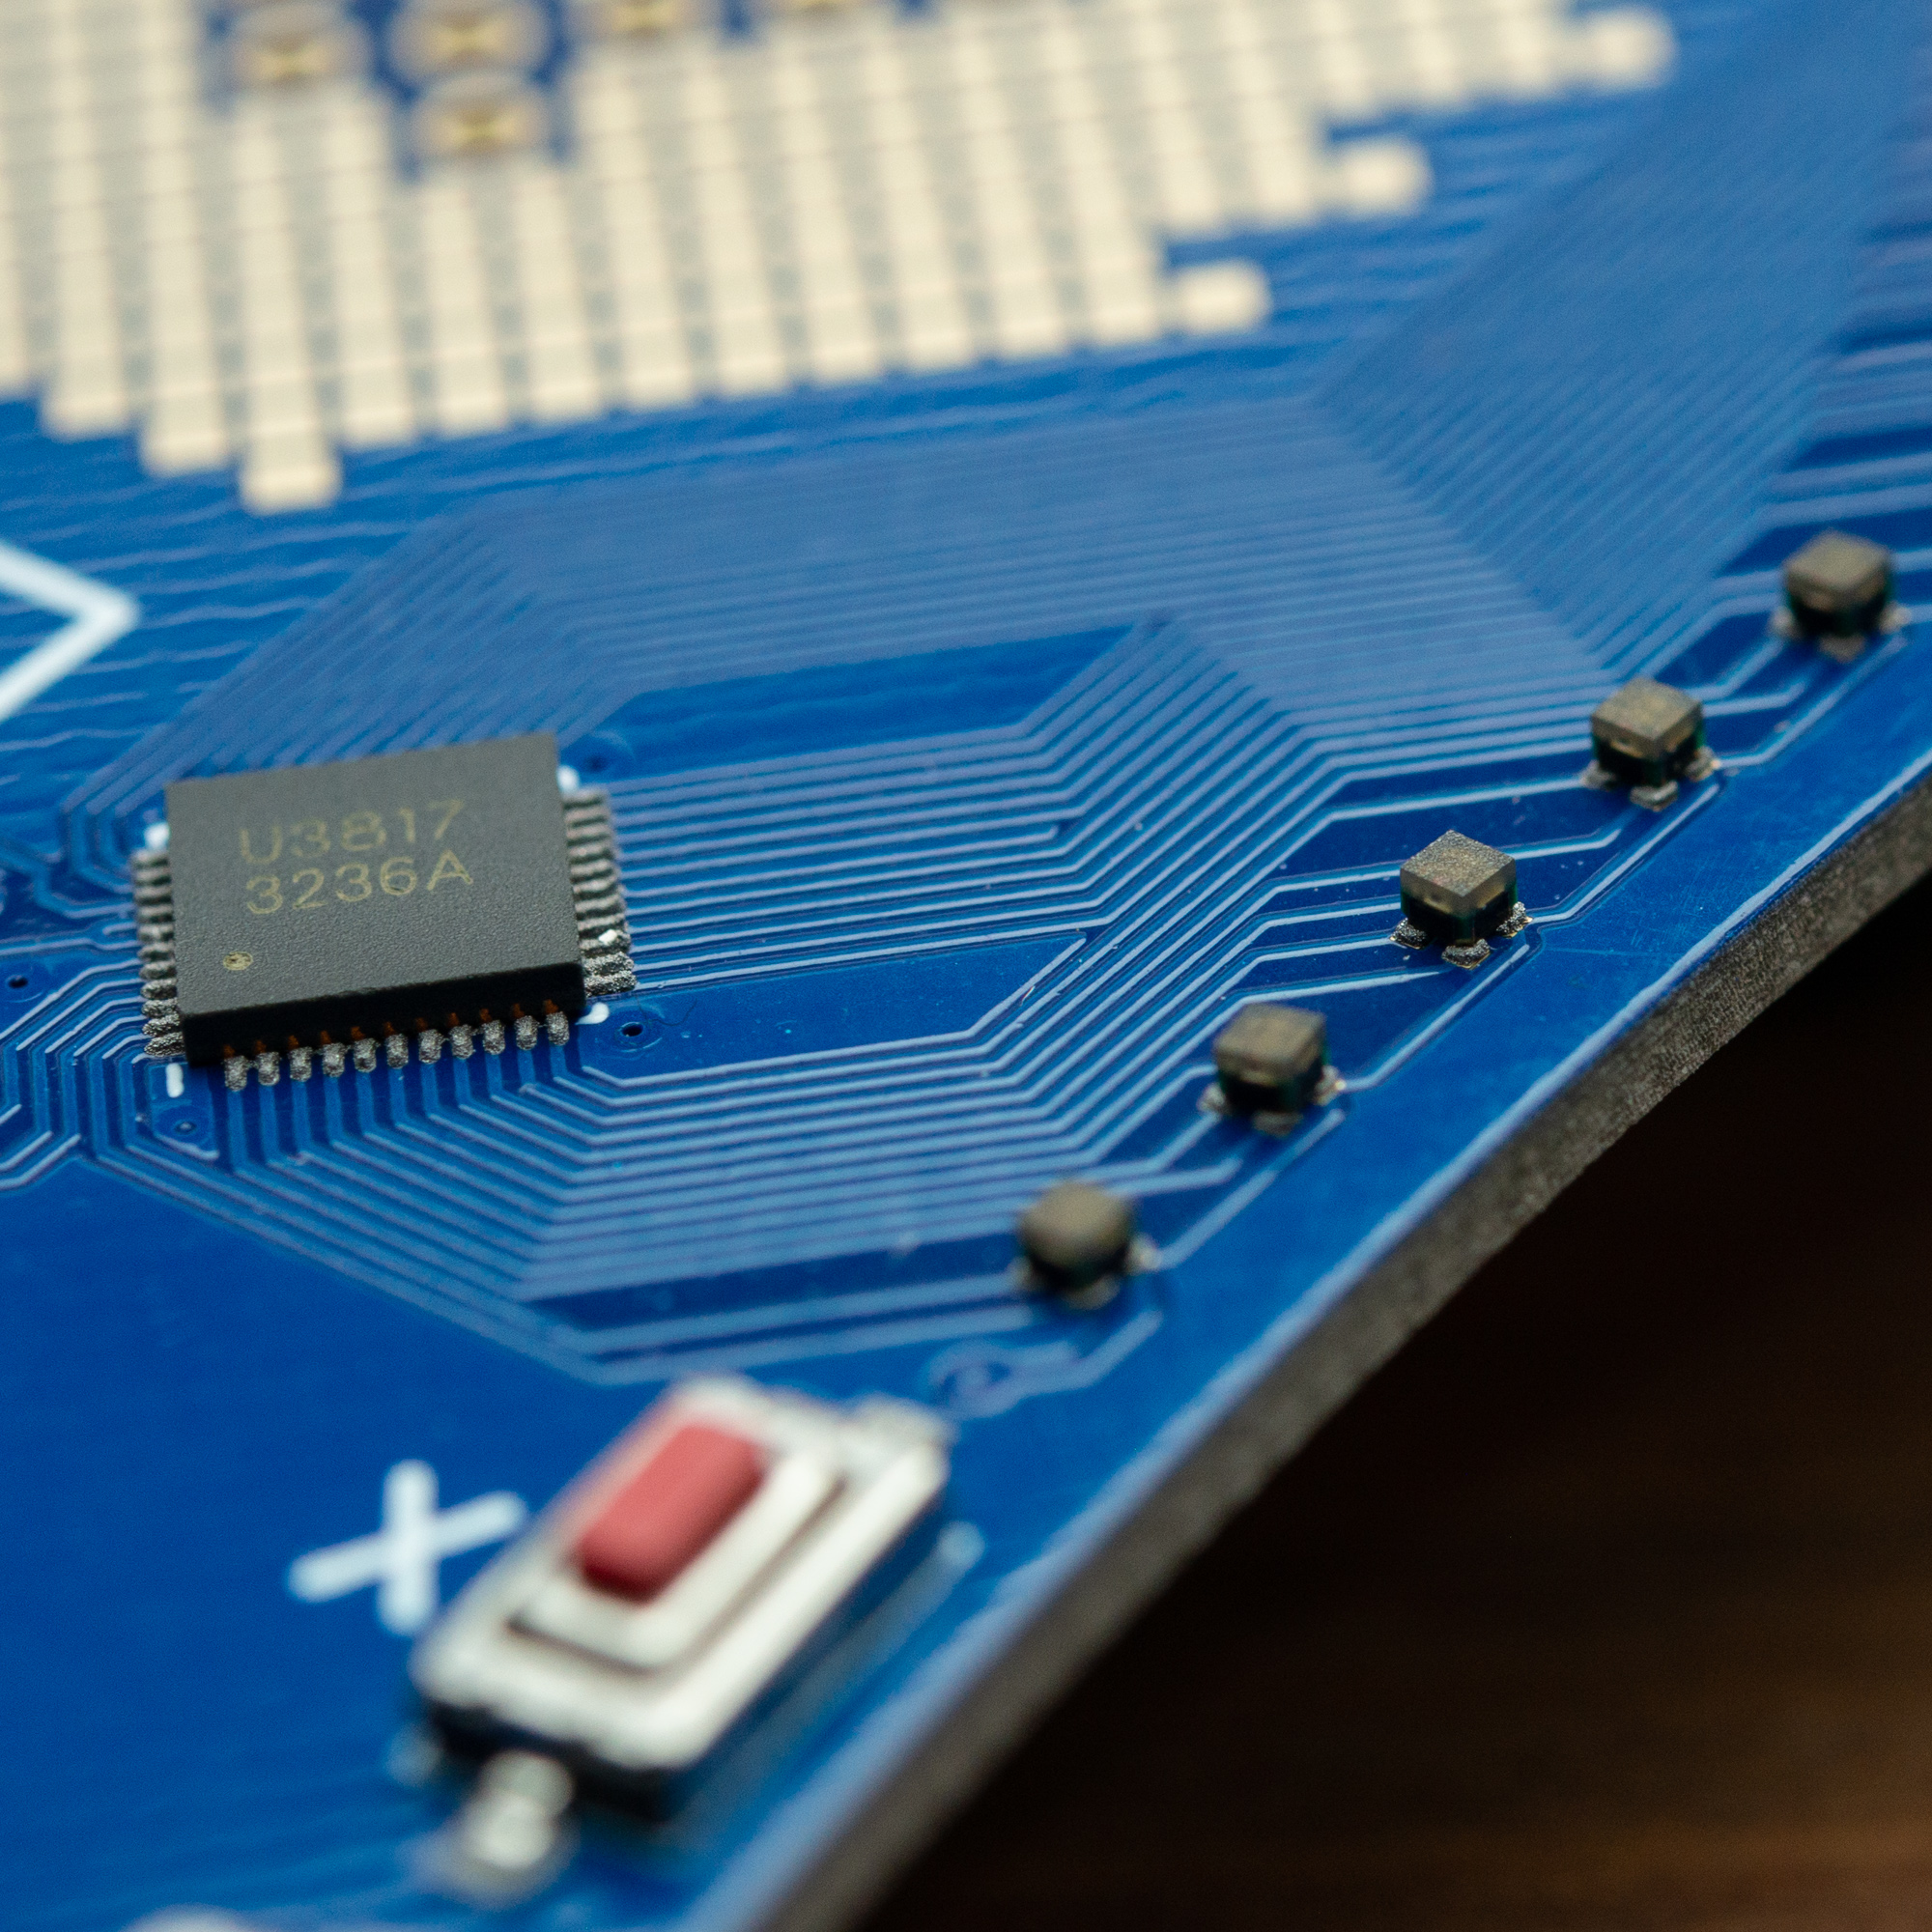 All SMD components placed on the KiCon badge